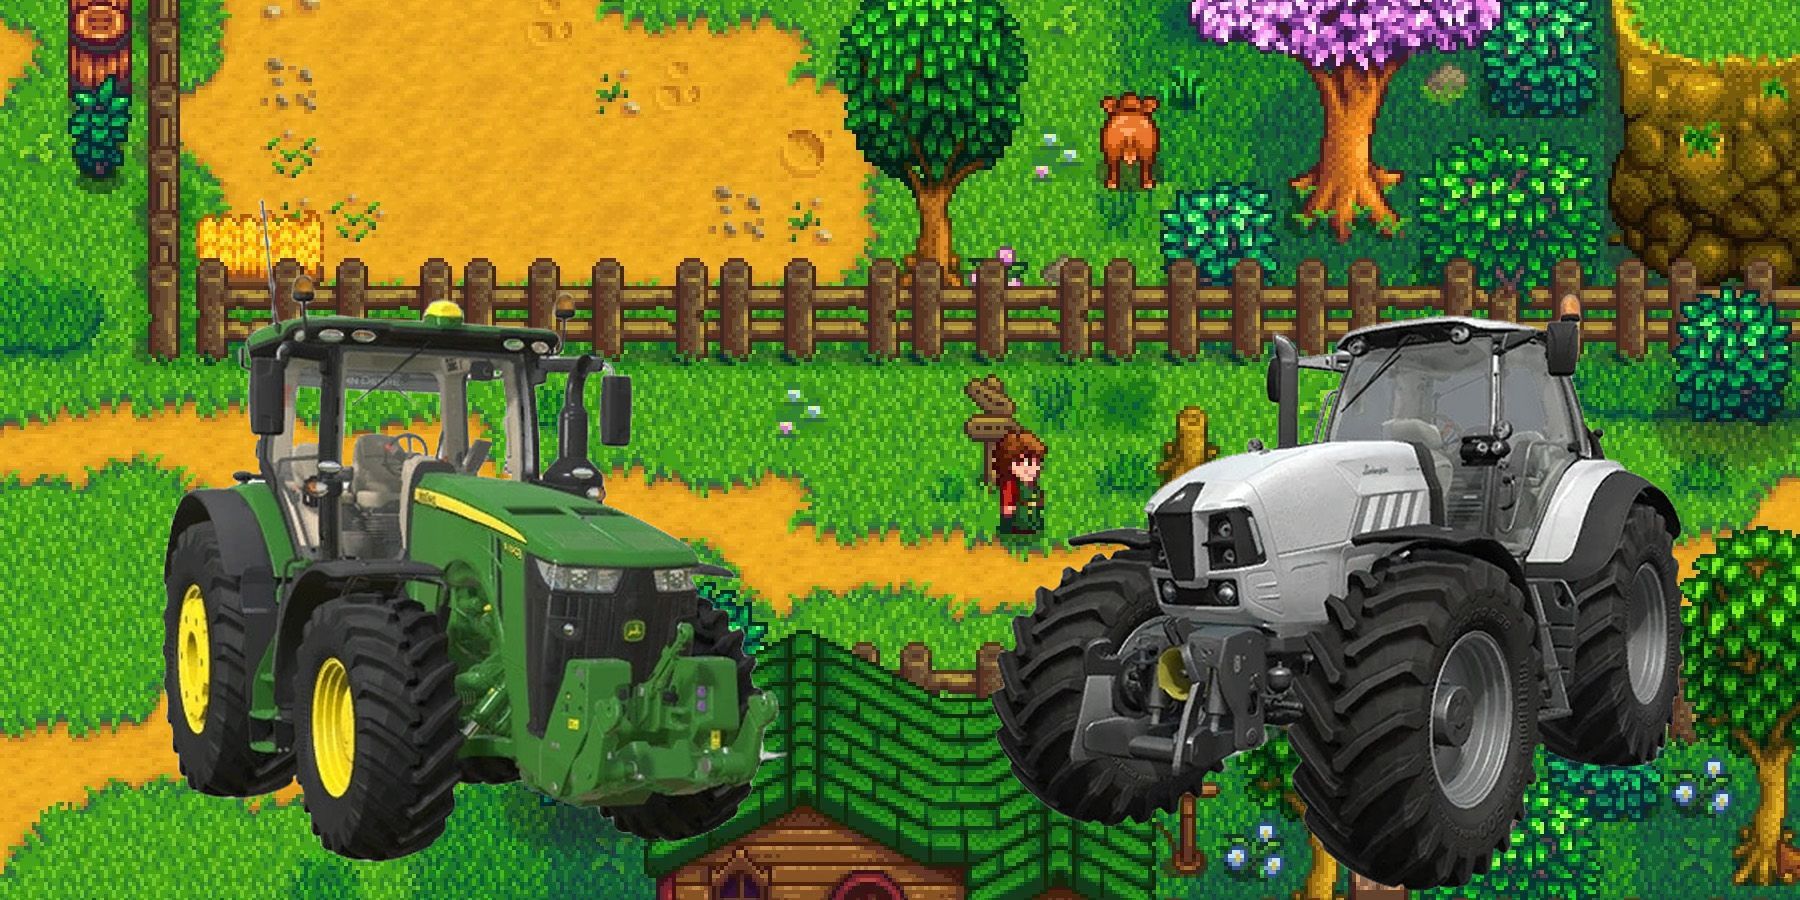 Acclaimed Farming Sim 'Stardew Valley' Coming to iOS